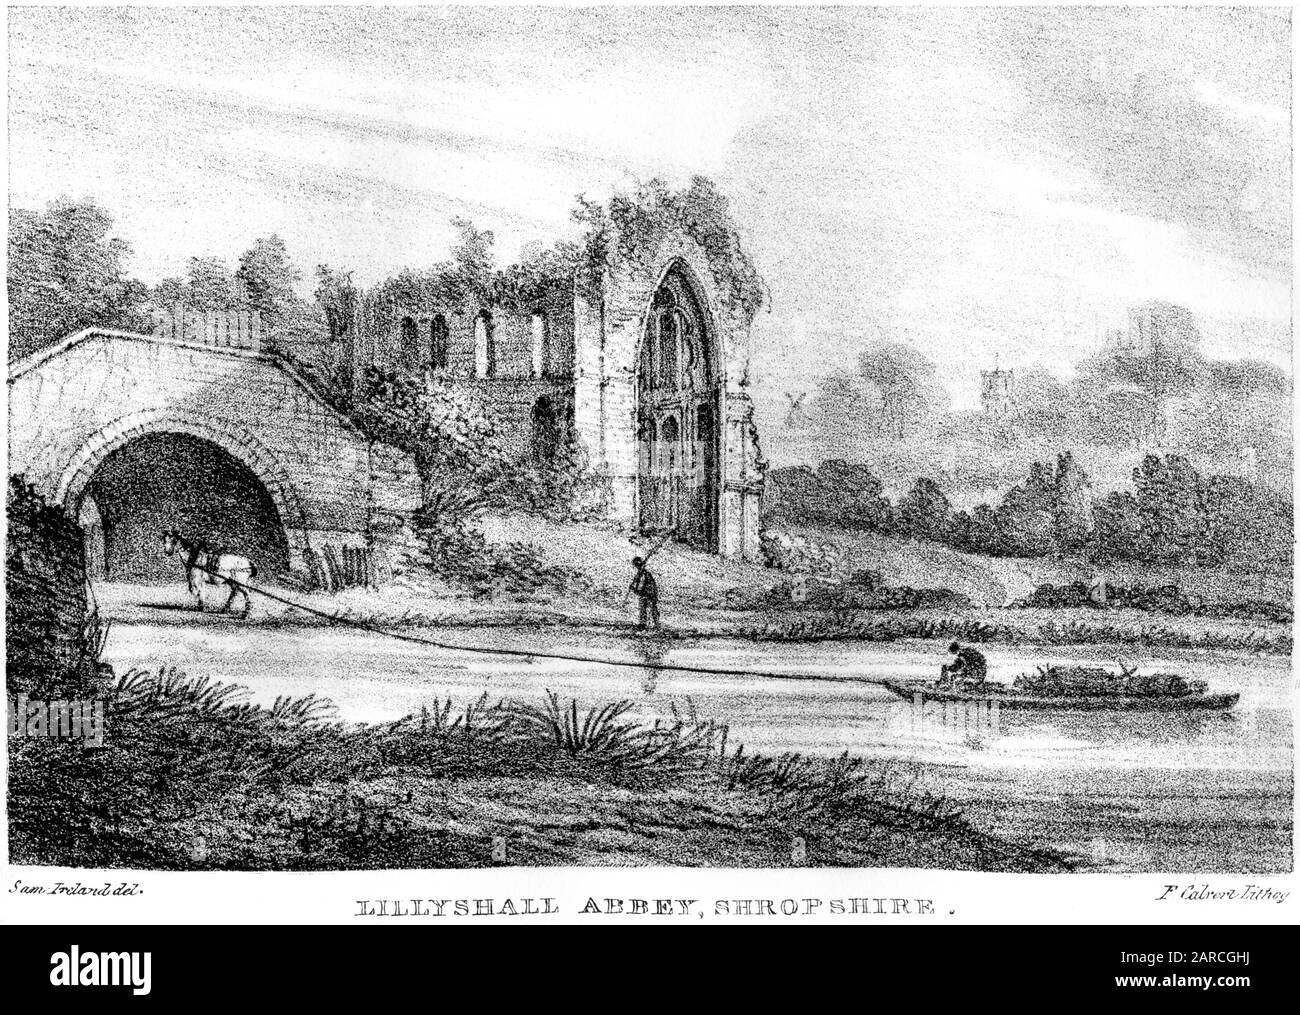 A lithograph of Lillyshal (Lilleshall) Abbey, Shropshire scanned at high resolution. from a book printed in 1824. Believed copyright free. Stock Photo